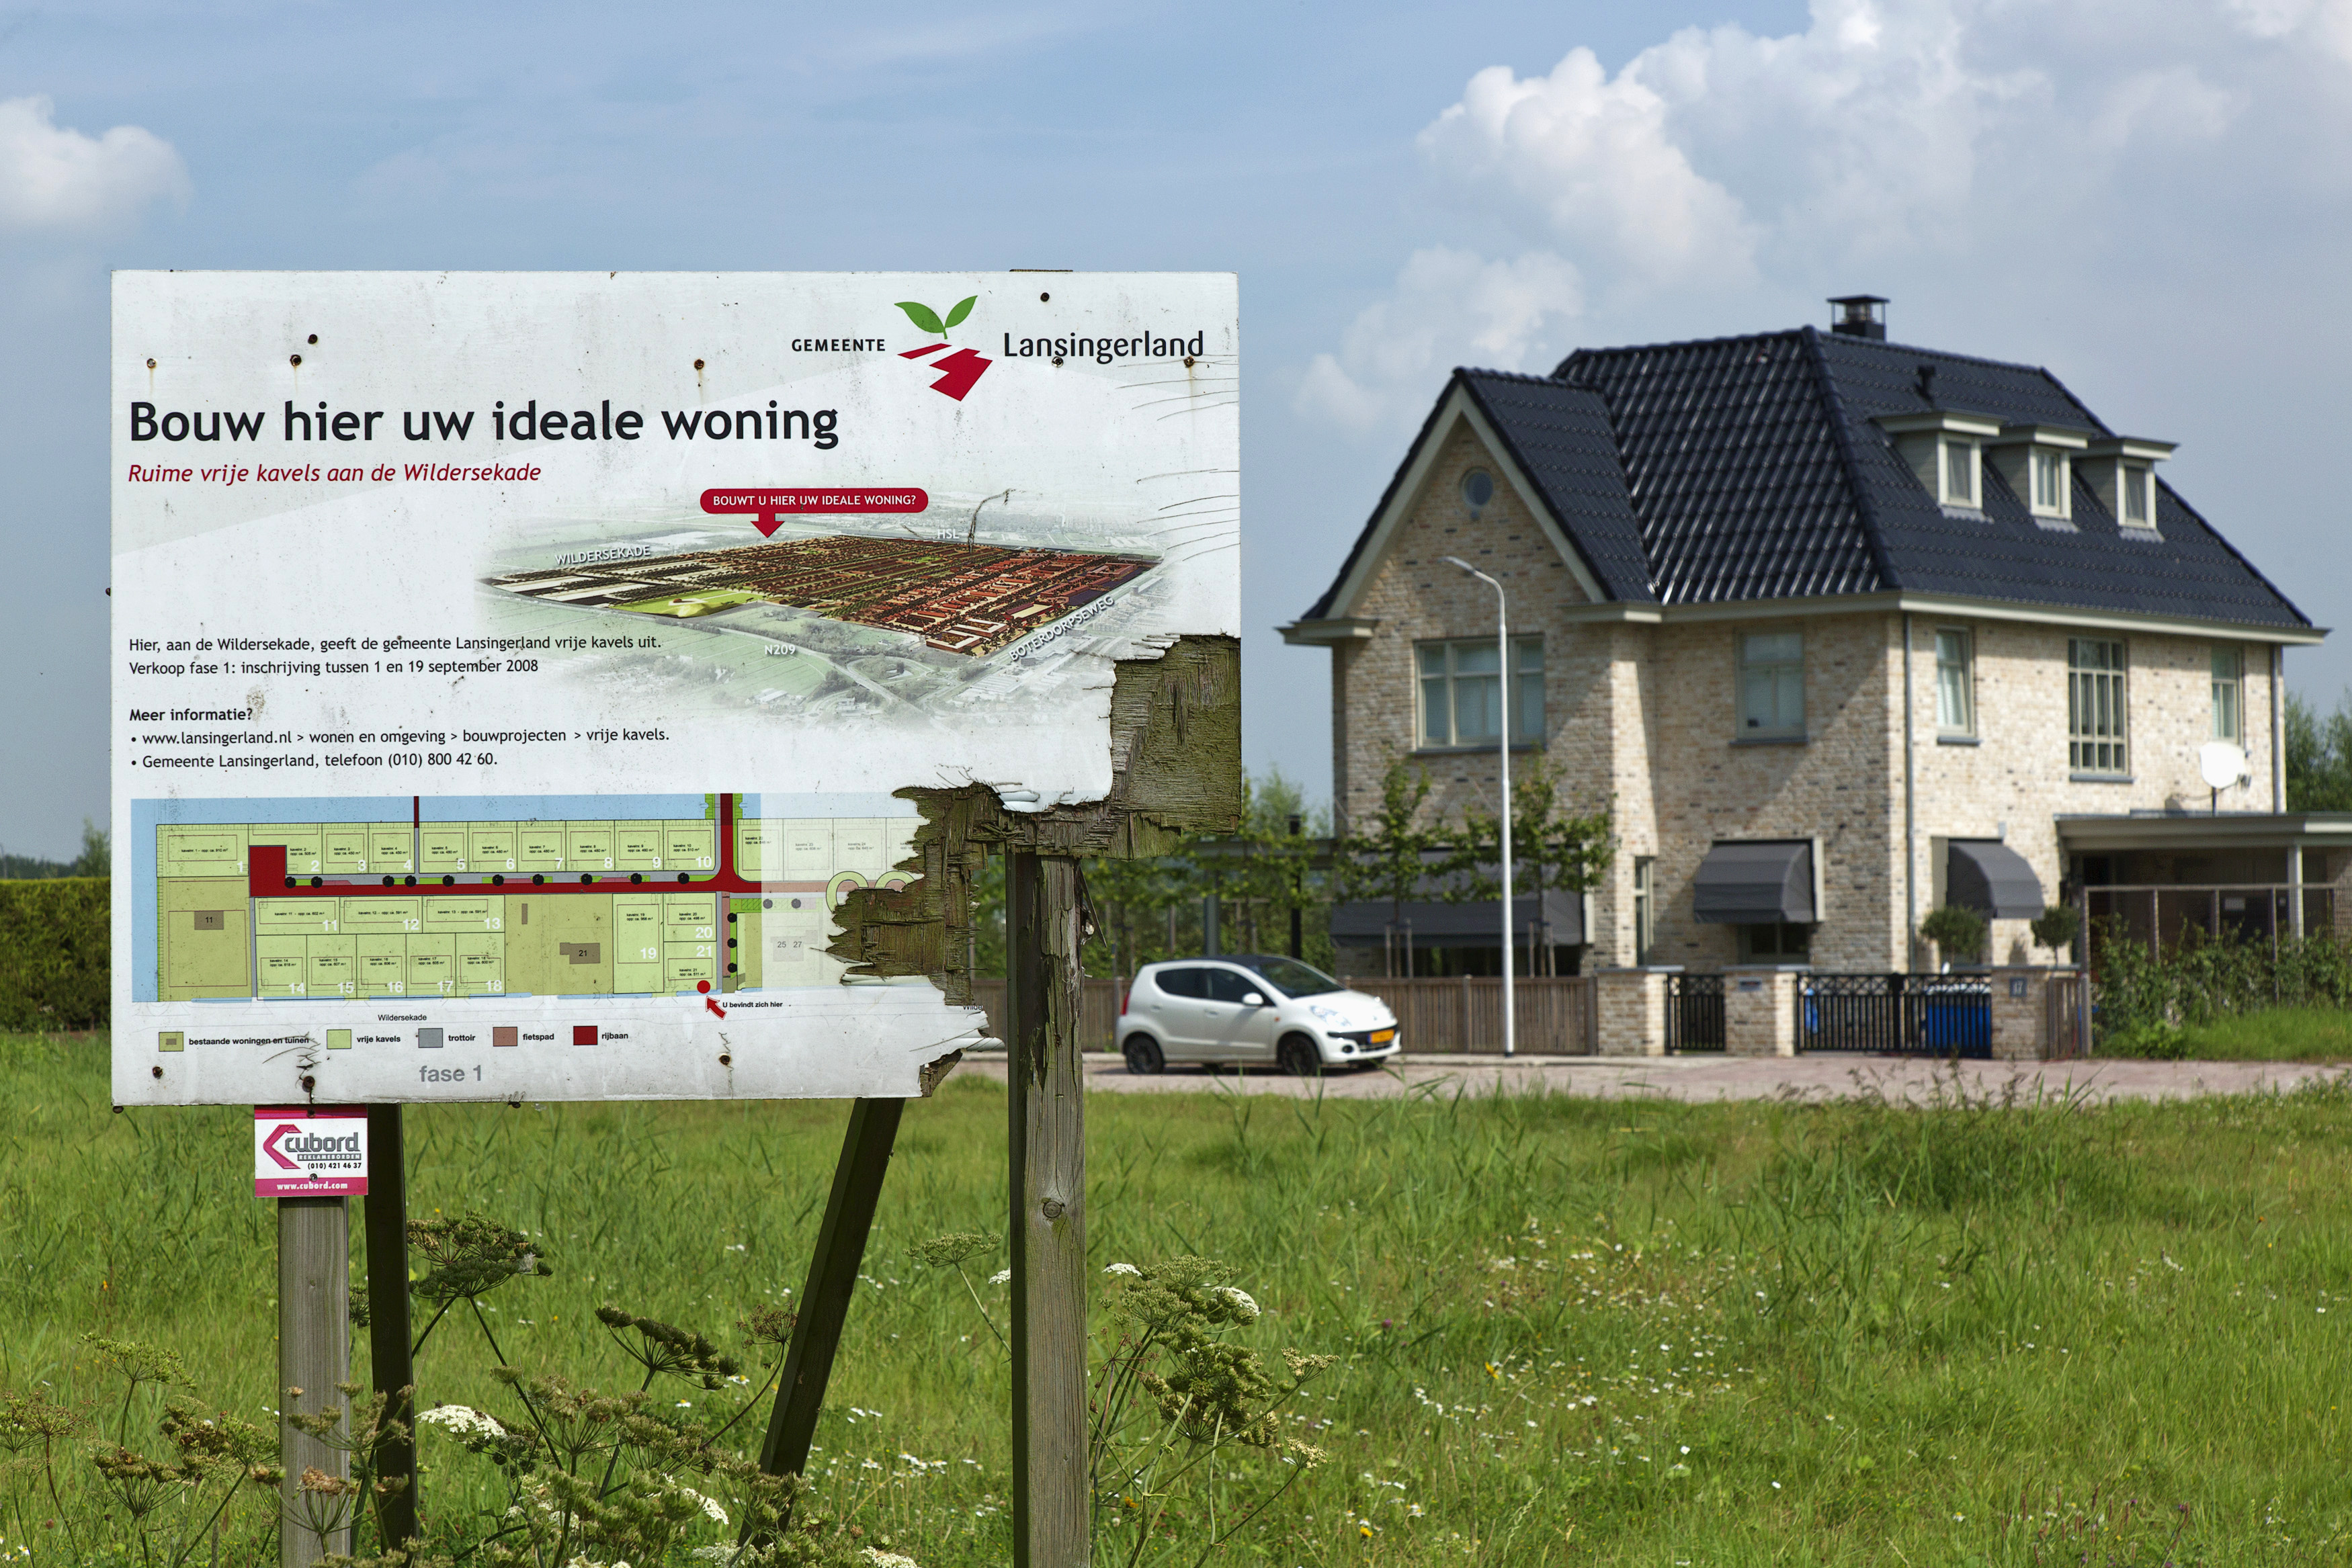 Weathered wooden sign advertising new luxury housing is seen in Lansingerland